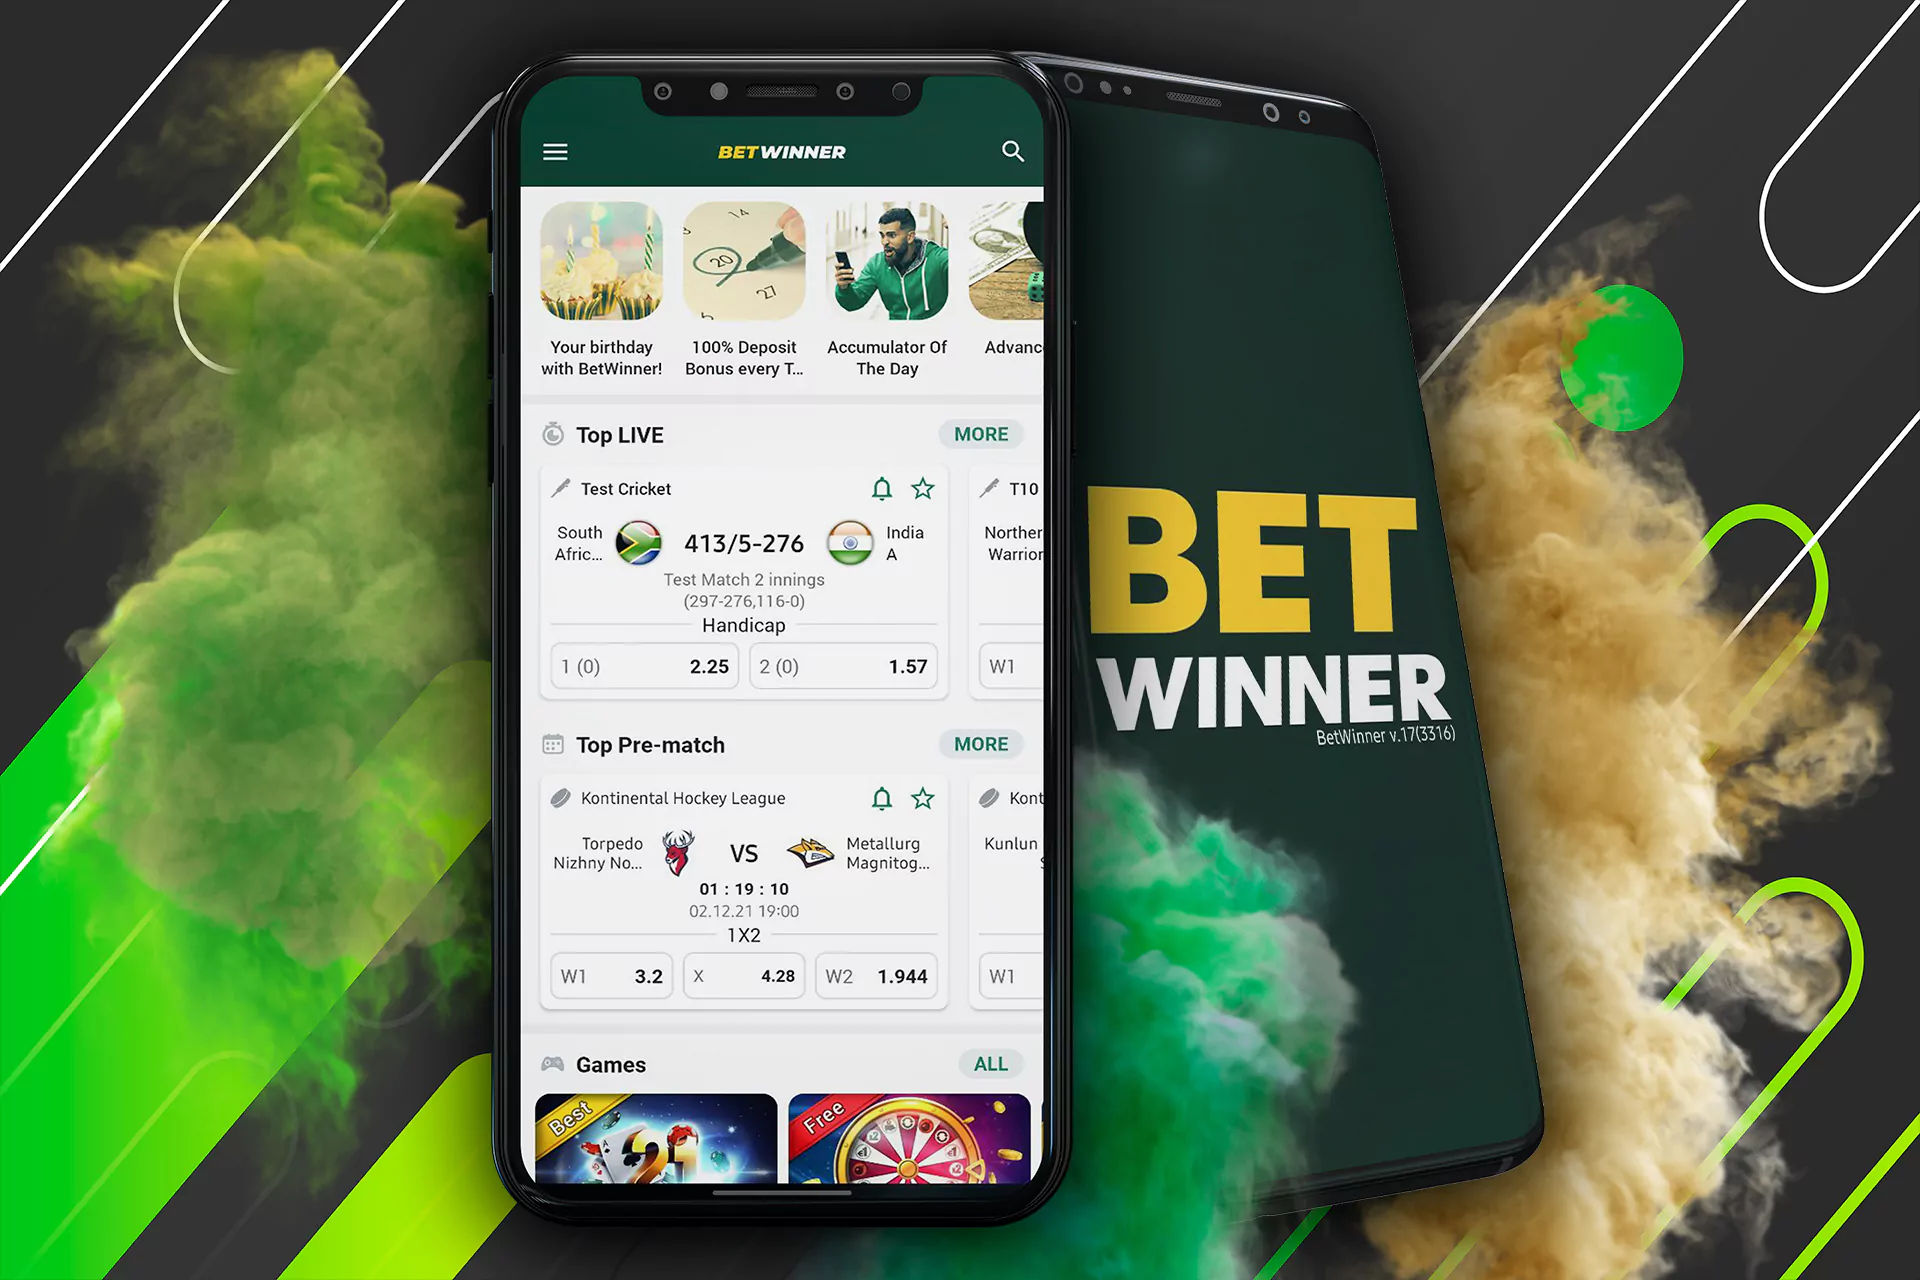 Install the Betwinner mobile app and place bets whenever you want.